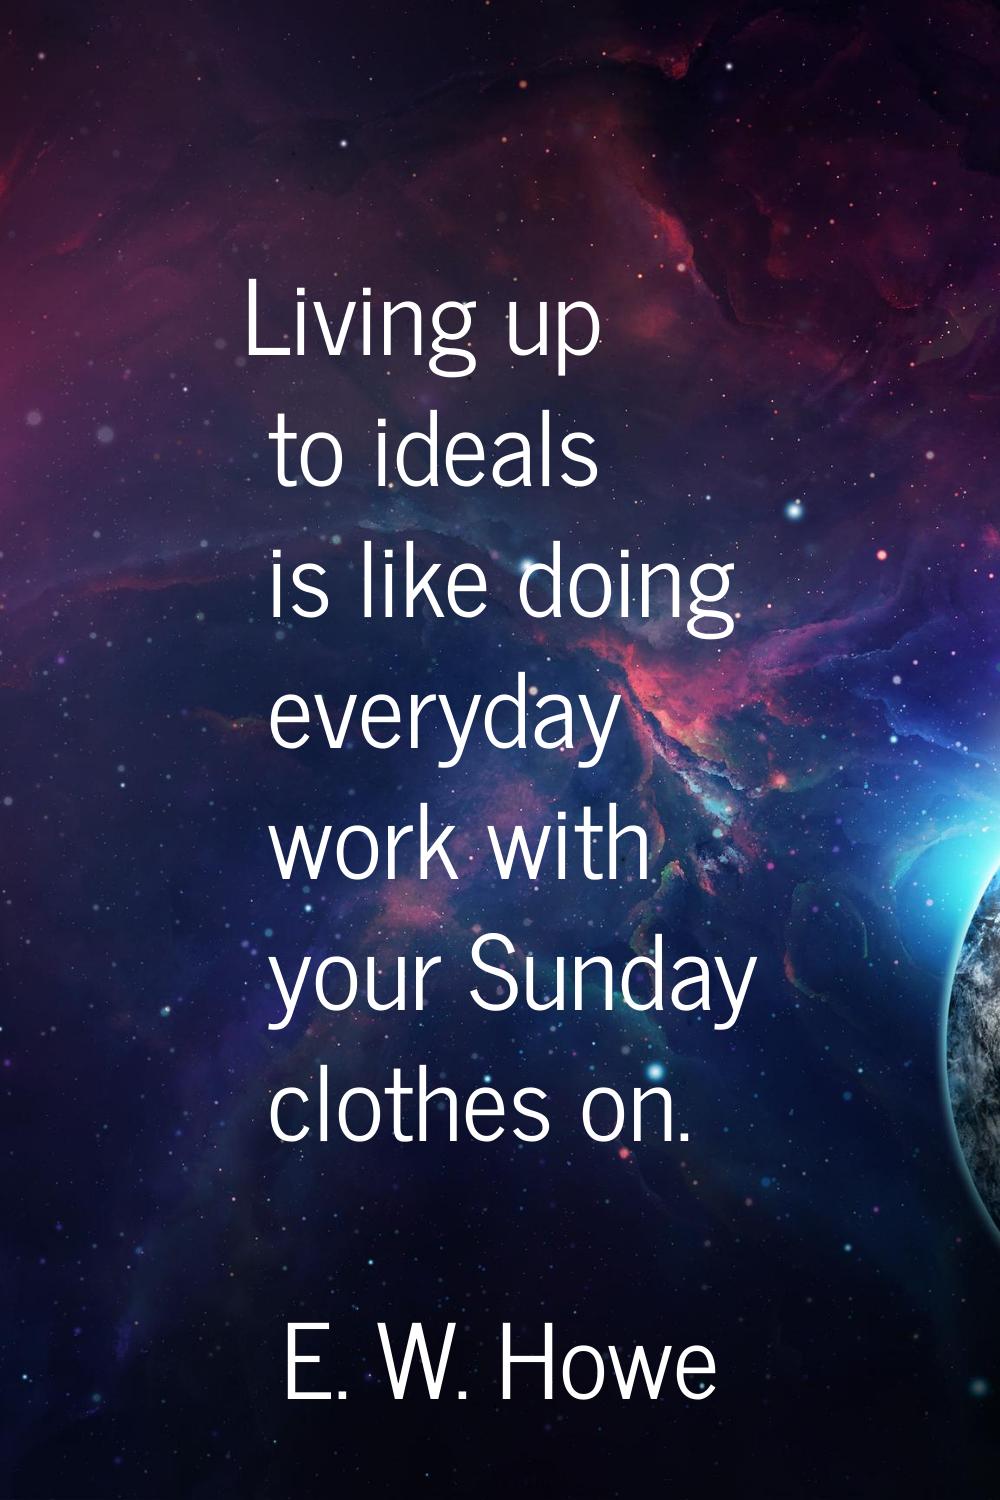 Living up to ideals is like doing everyday work with your Sunday clothes on.